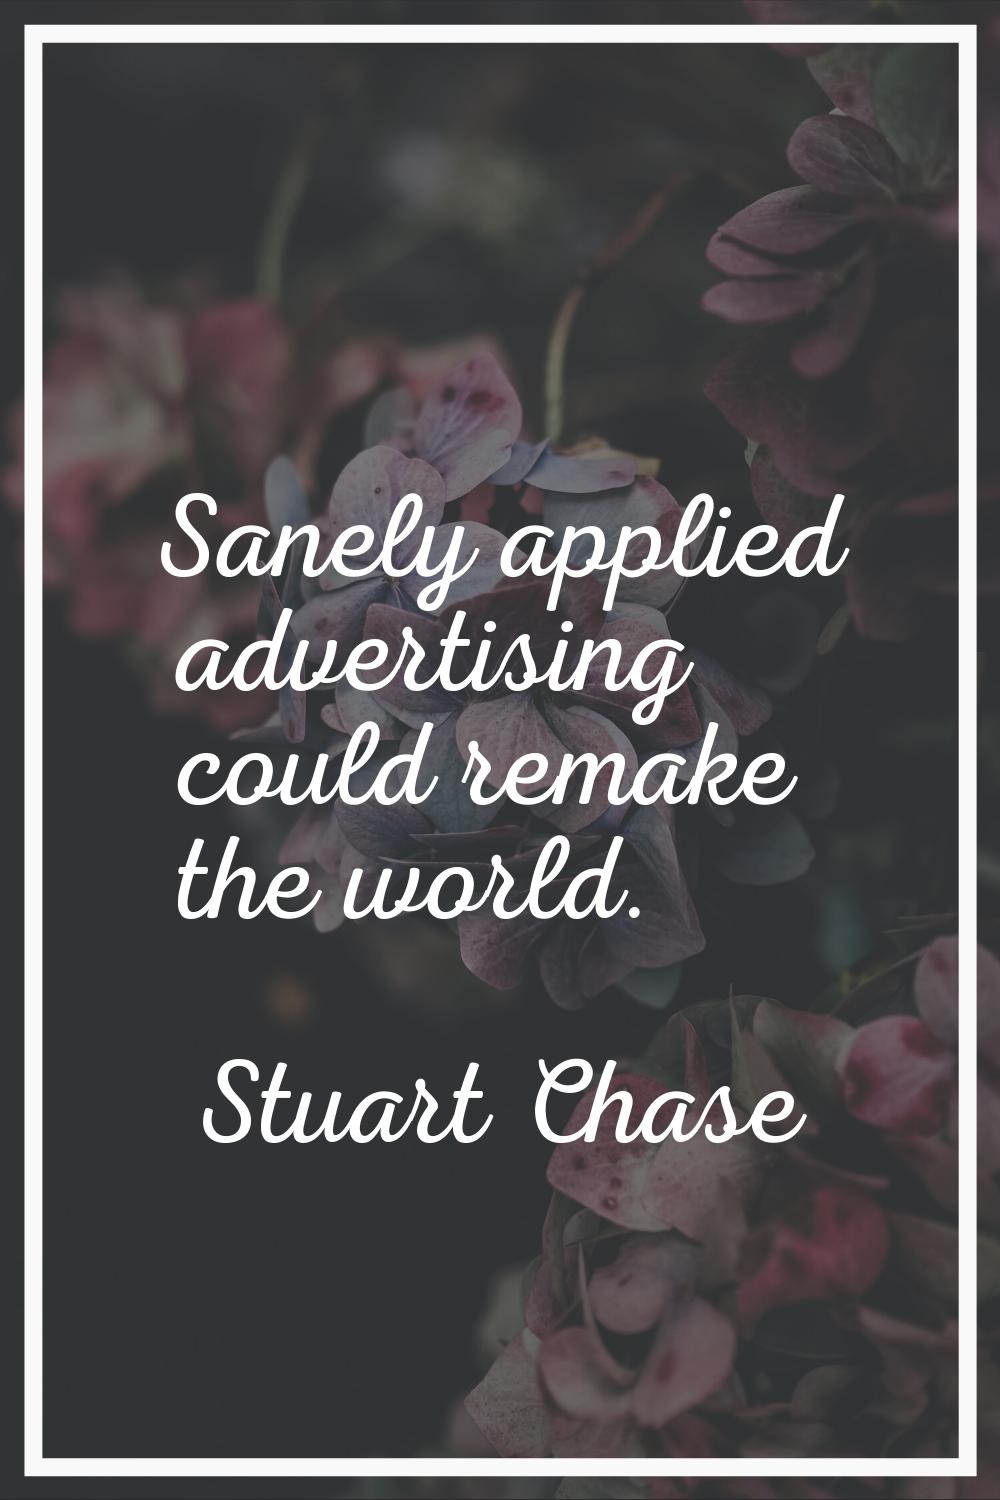 Sanely applied advertising could remake the world.